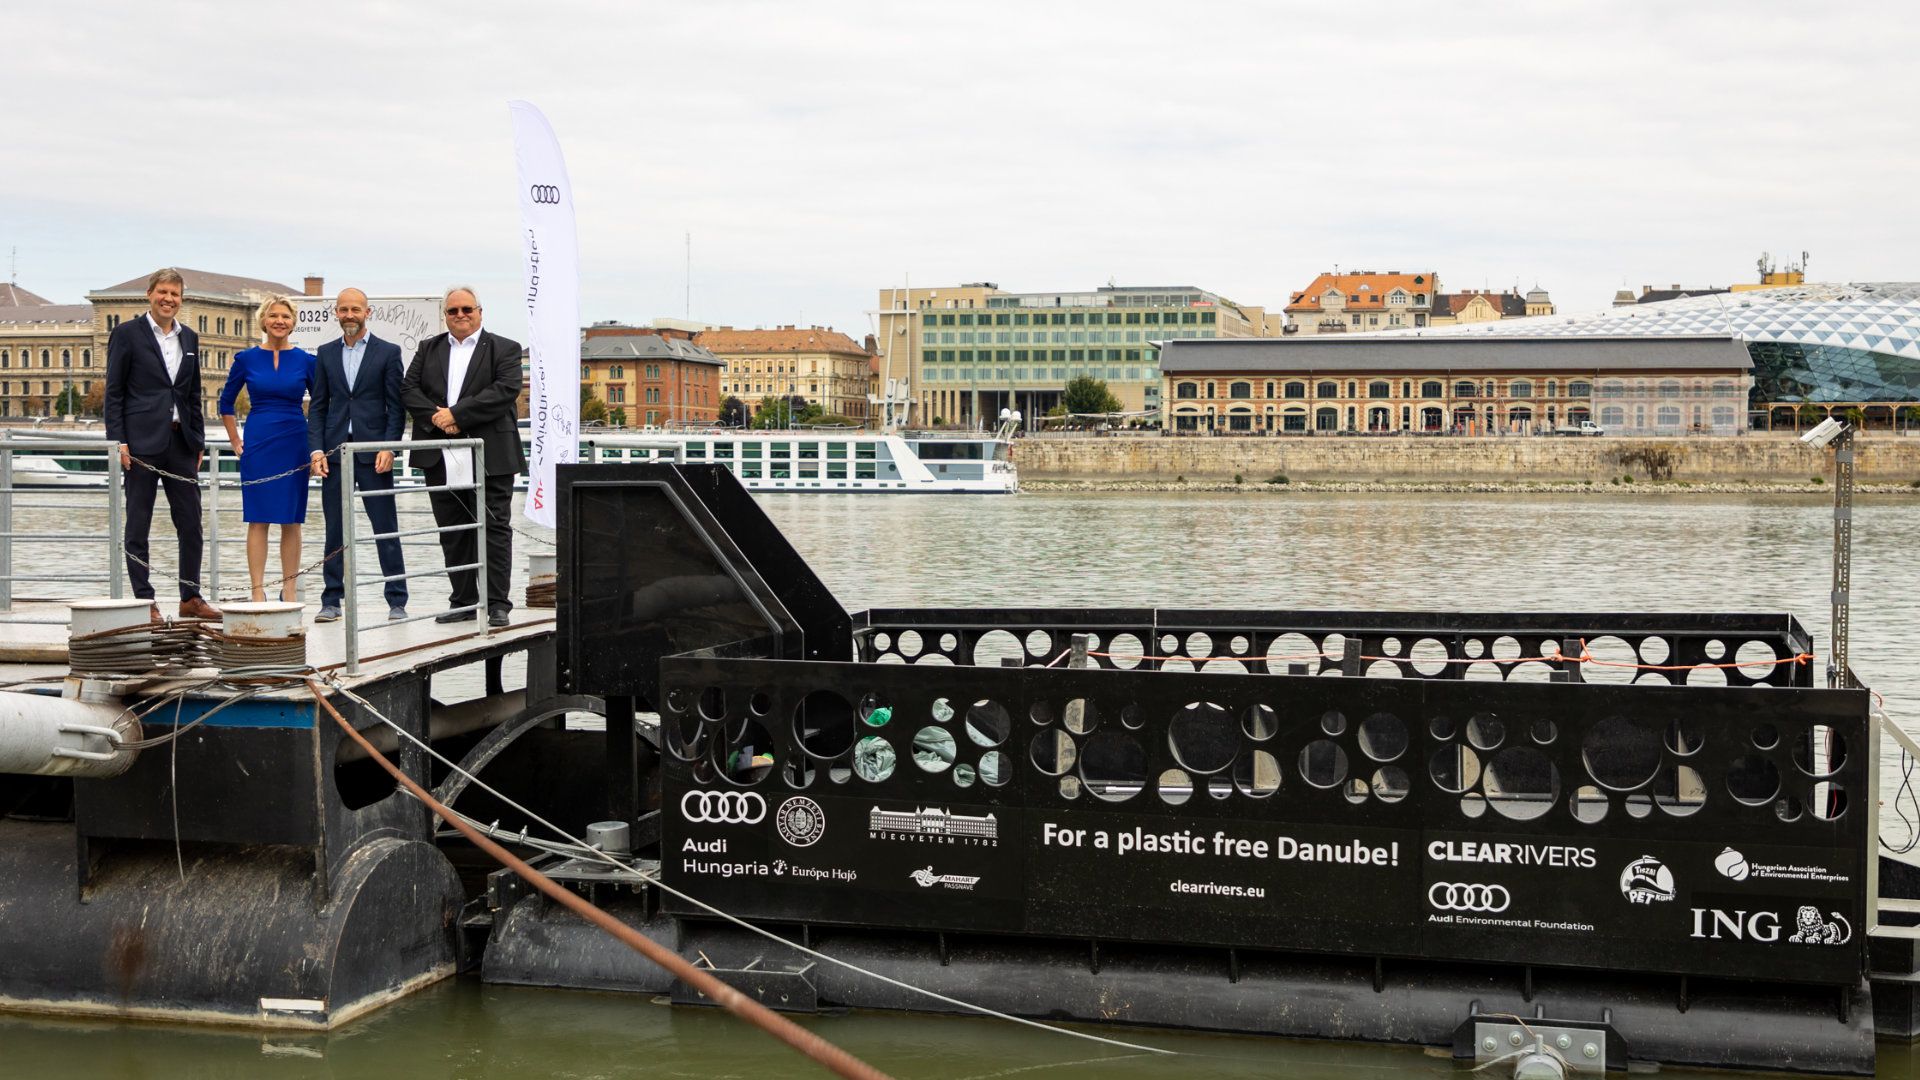 Opening of another Litter Trap in the Danube in Budapest